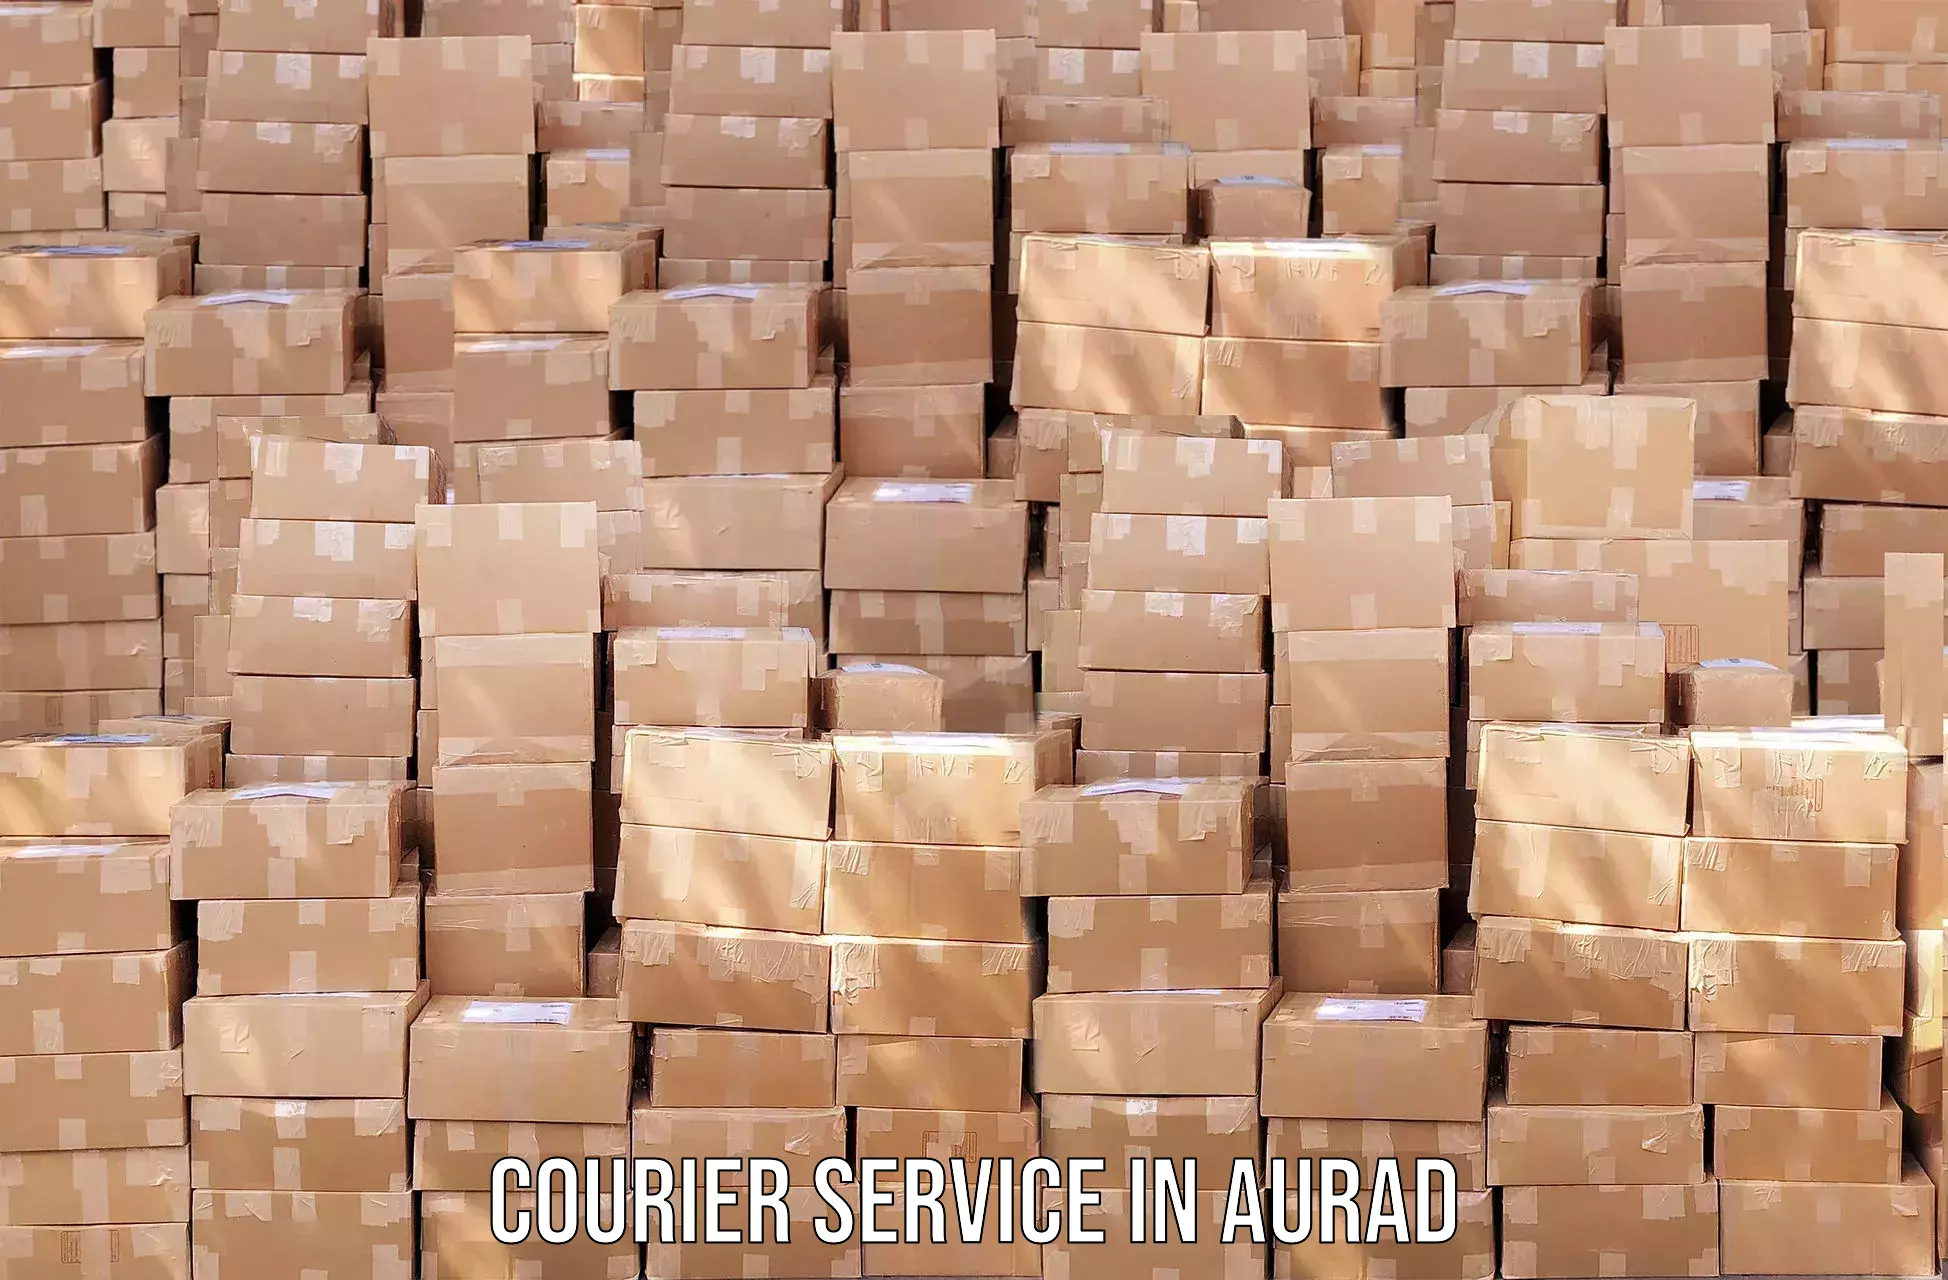 Business delivery service in Aurad